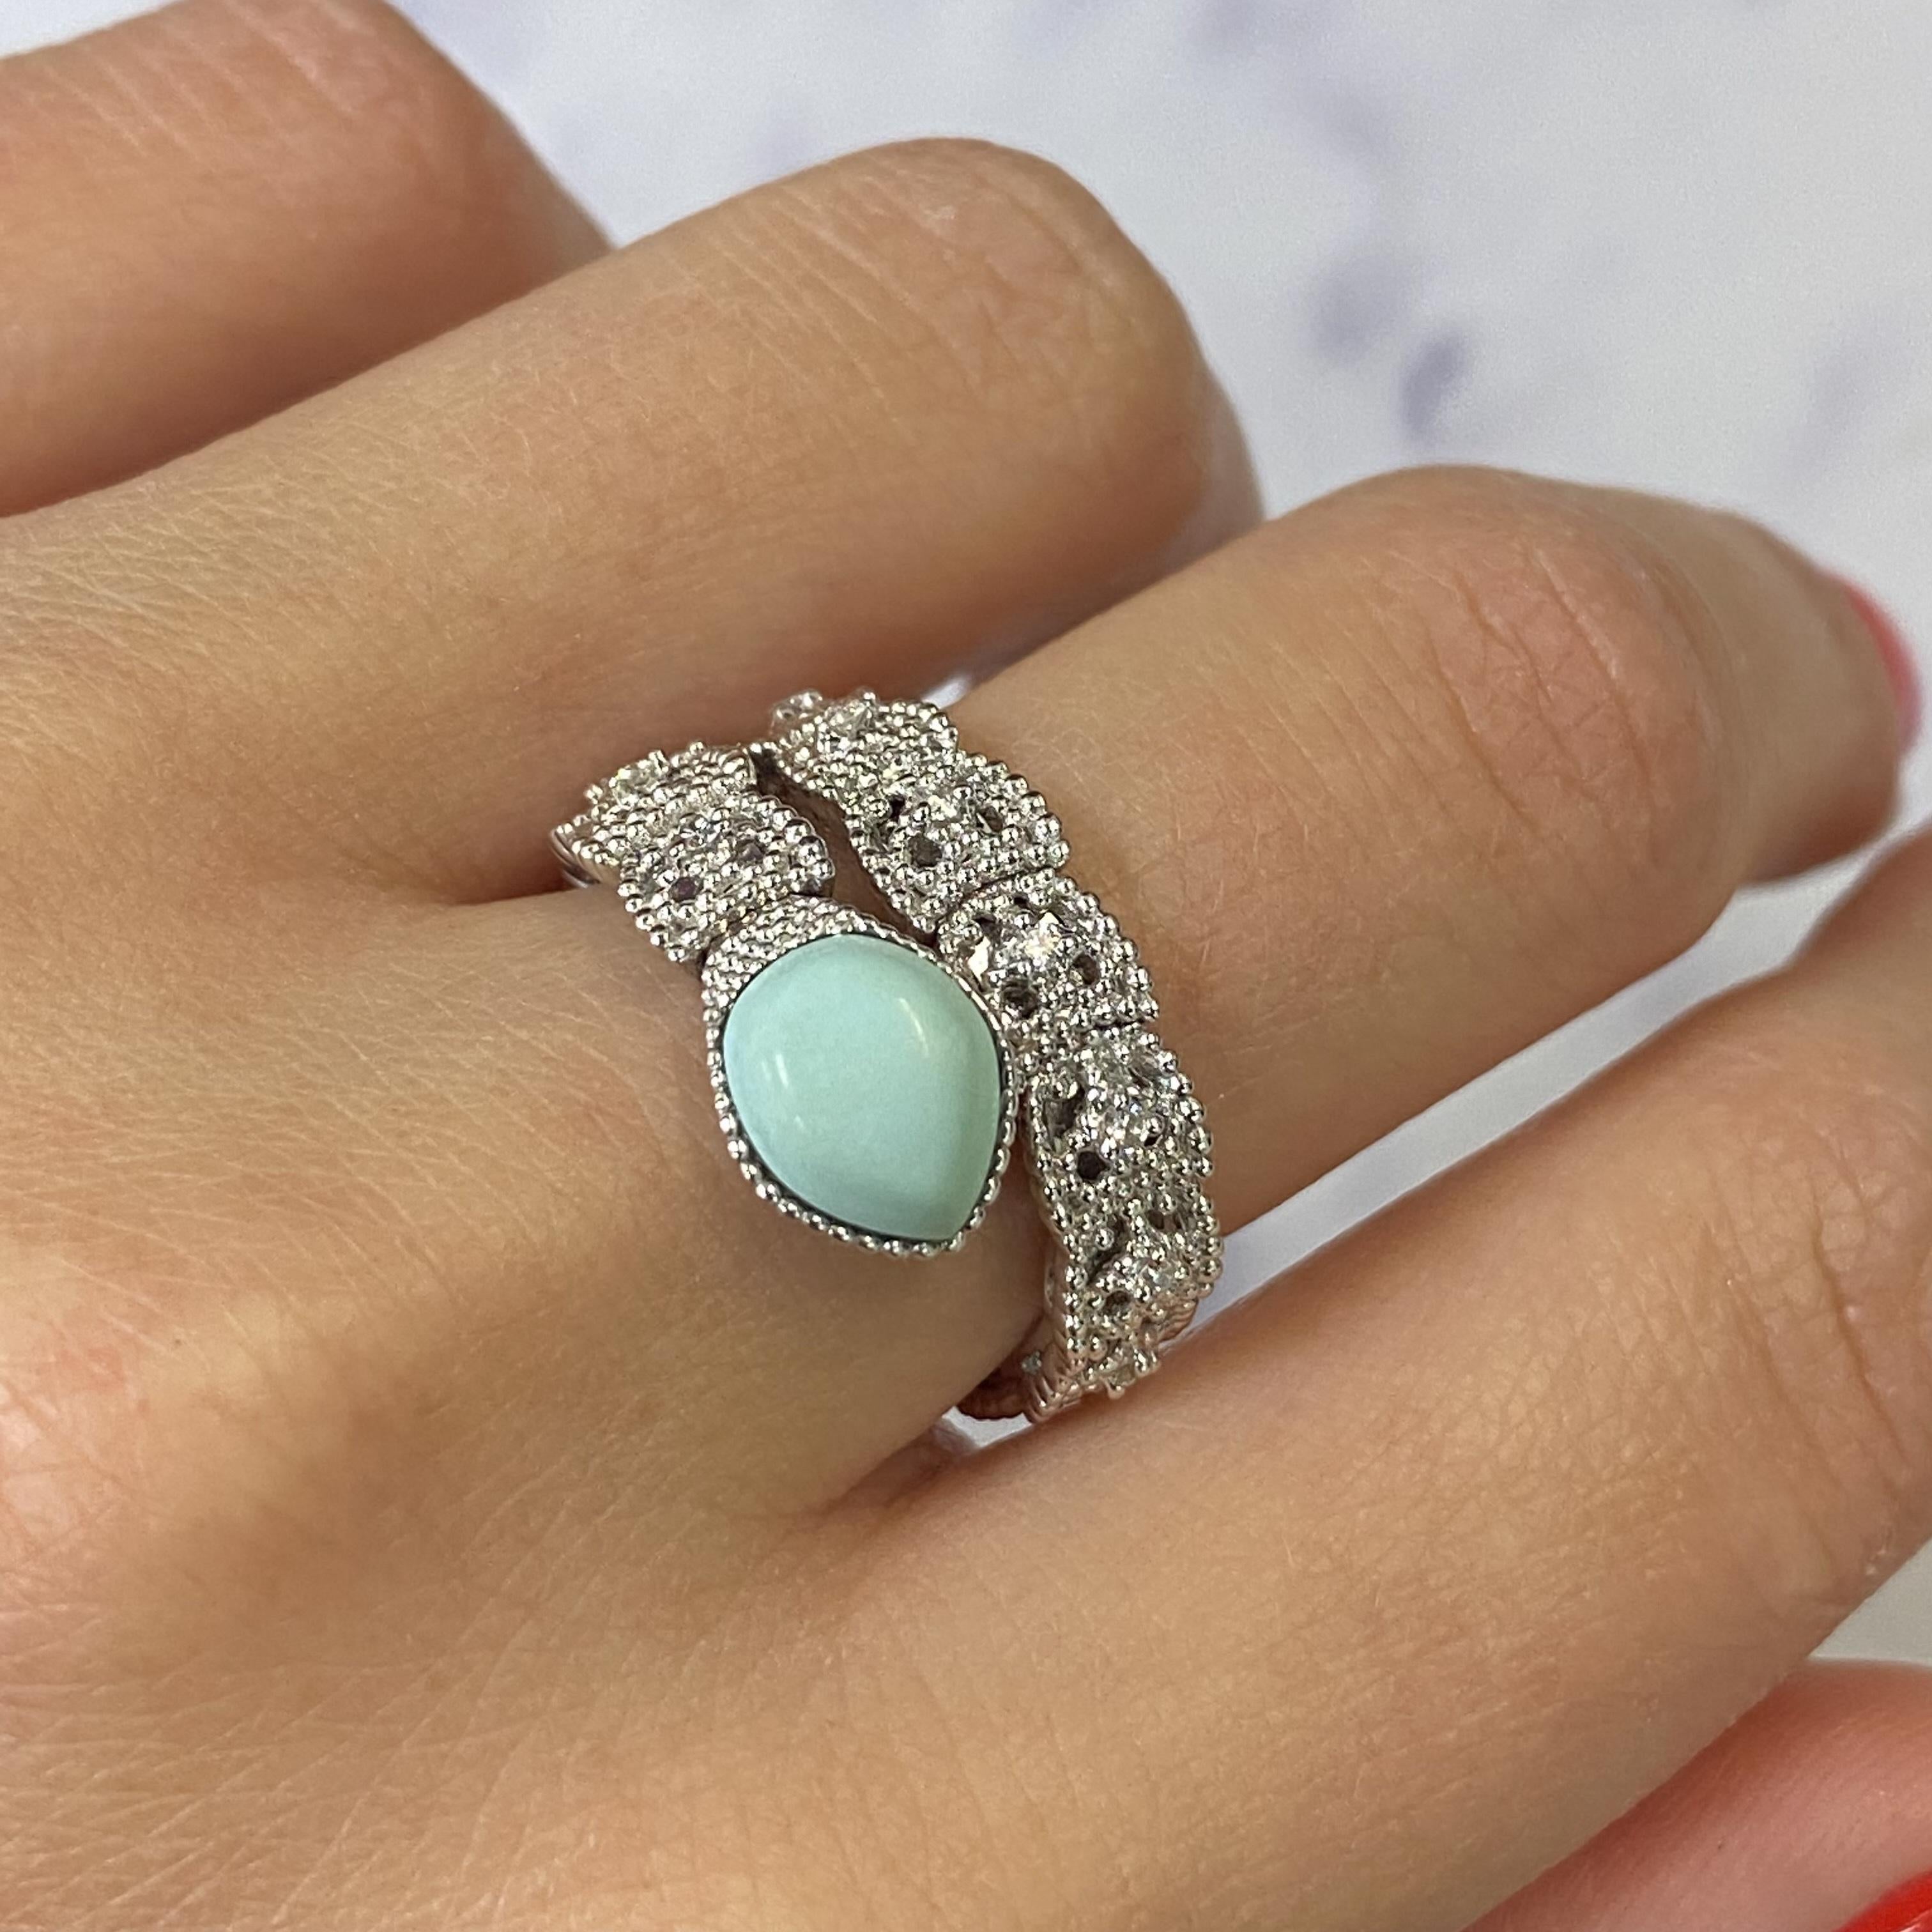 Piero Milano Natural Diamond & Turquoise Ring 18k White Gold 0.18cttw Size 6.5 In New Condition For Sale In New York, NY